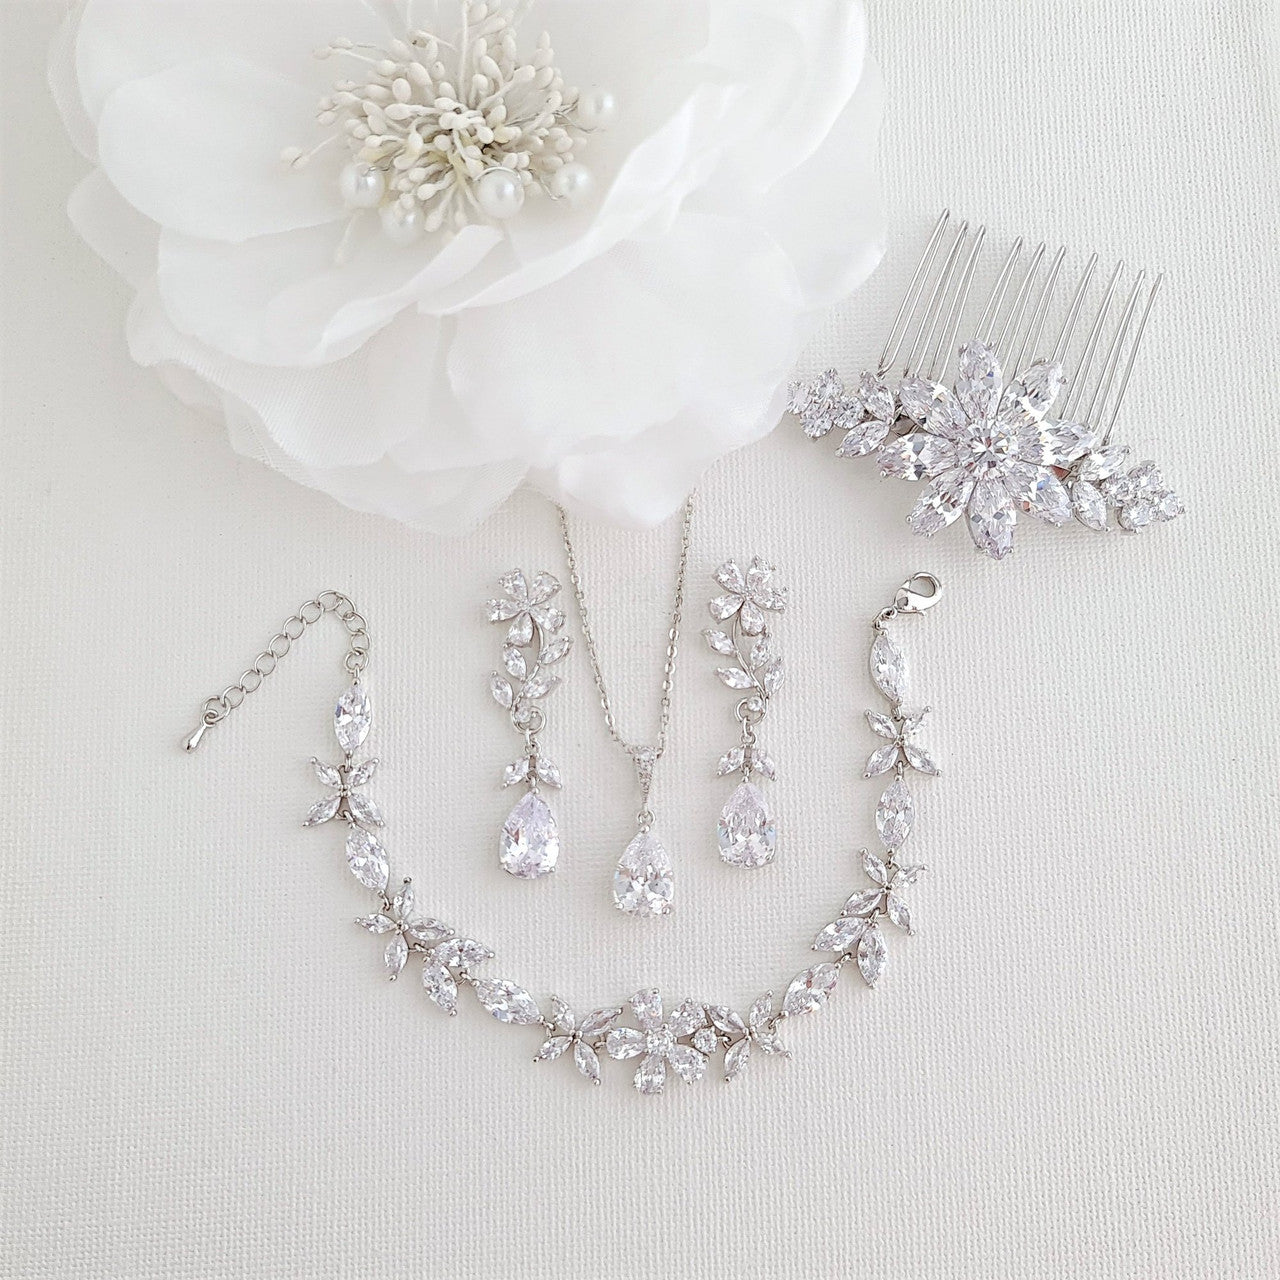 Gold Bridal Jewelry Set Earrings Necklace Bracelet Hair Comb-Daisy